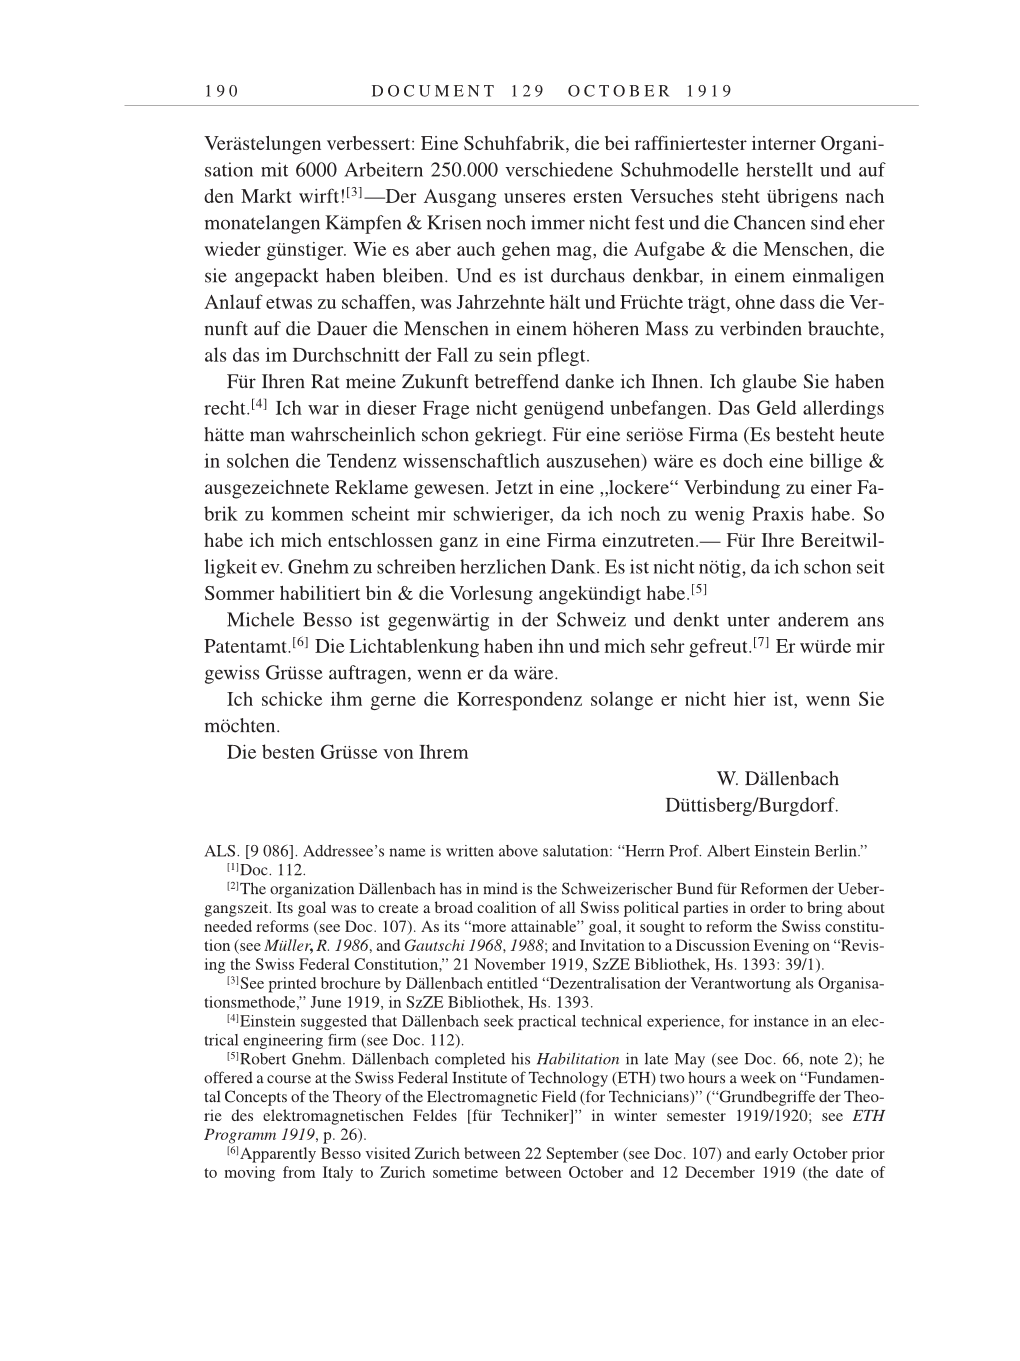 Volume 9: The Berlin Years: Correspondence January 1919-April 1920 page 190